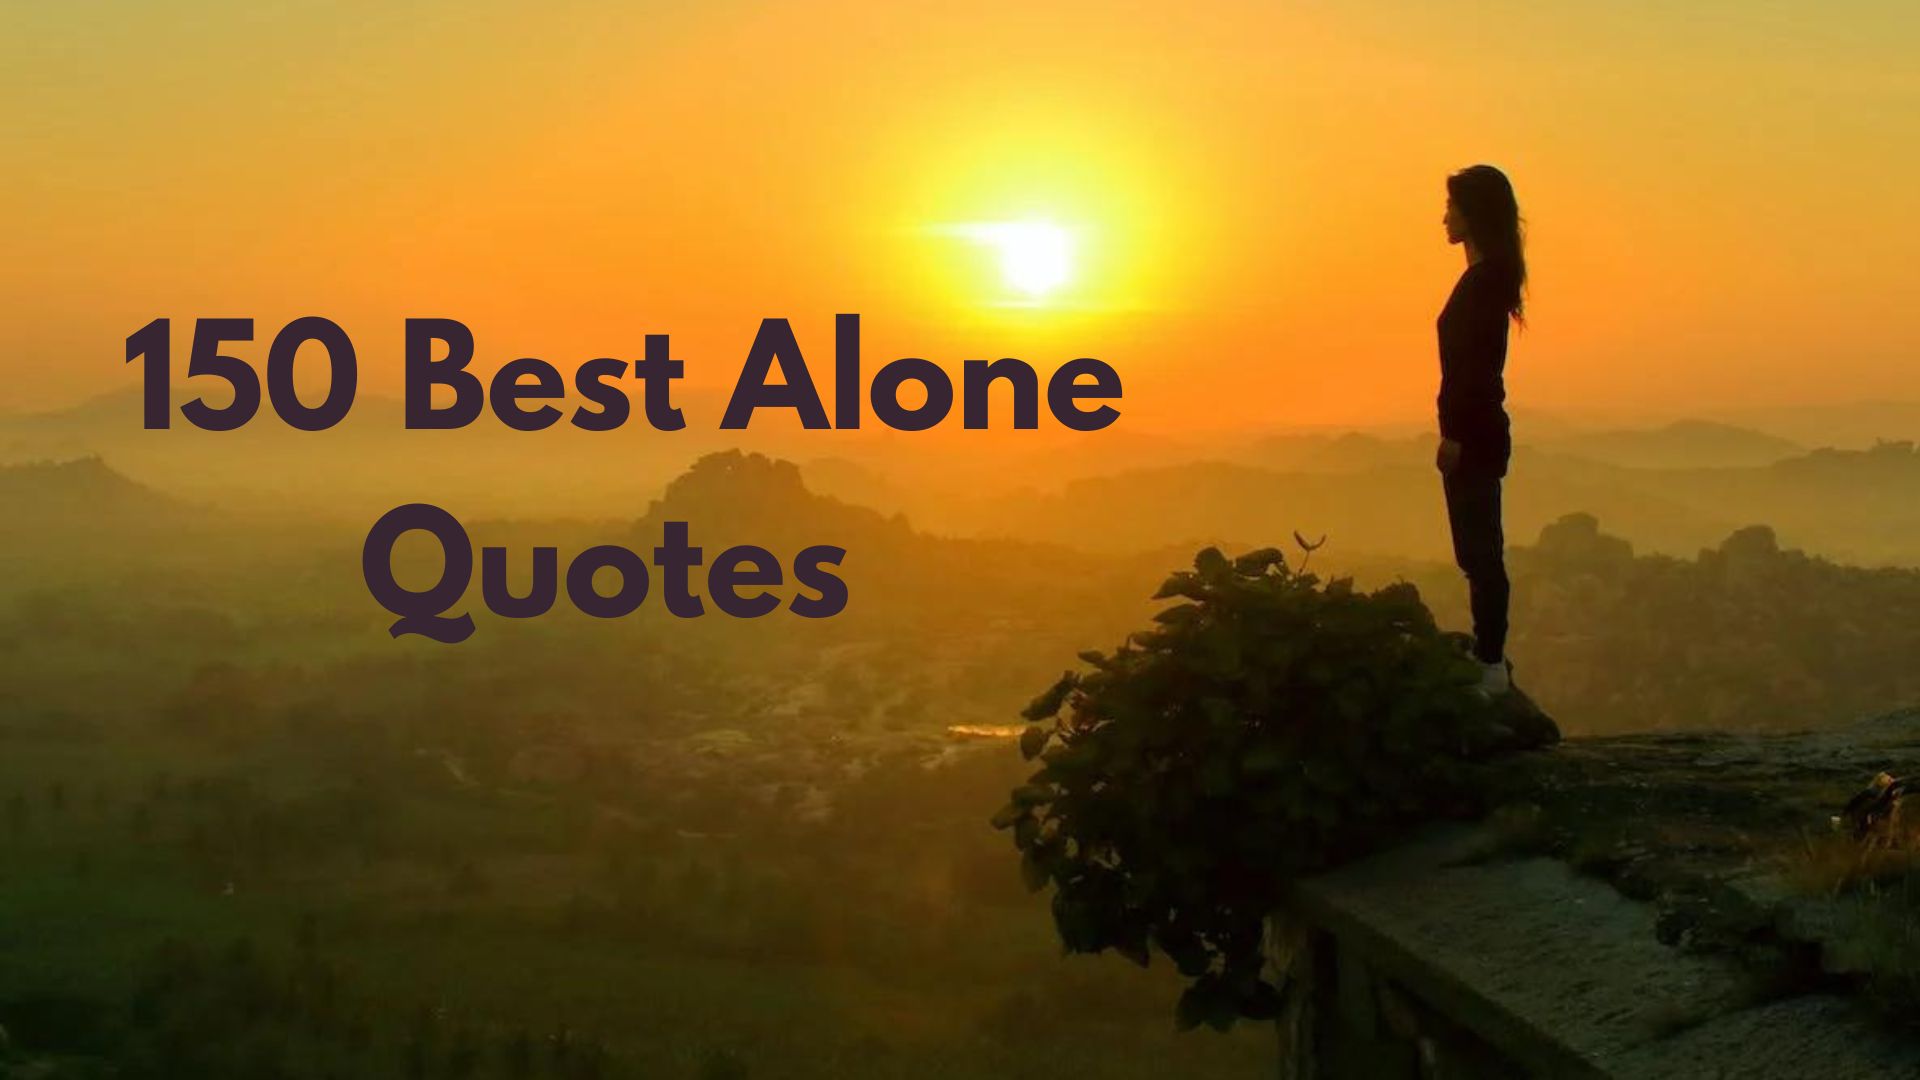 150 Best Alone Quotes